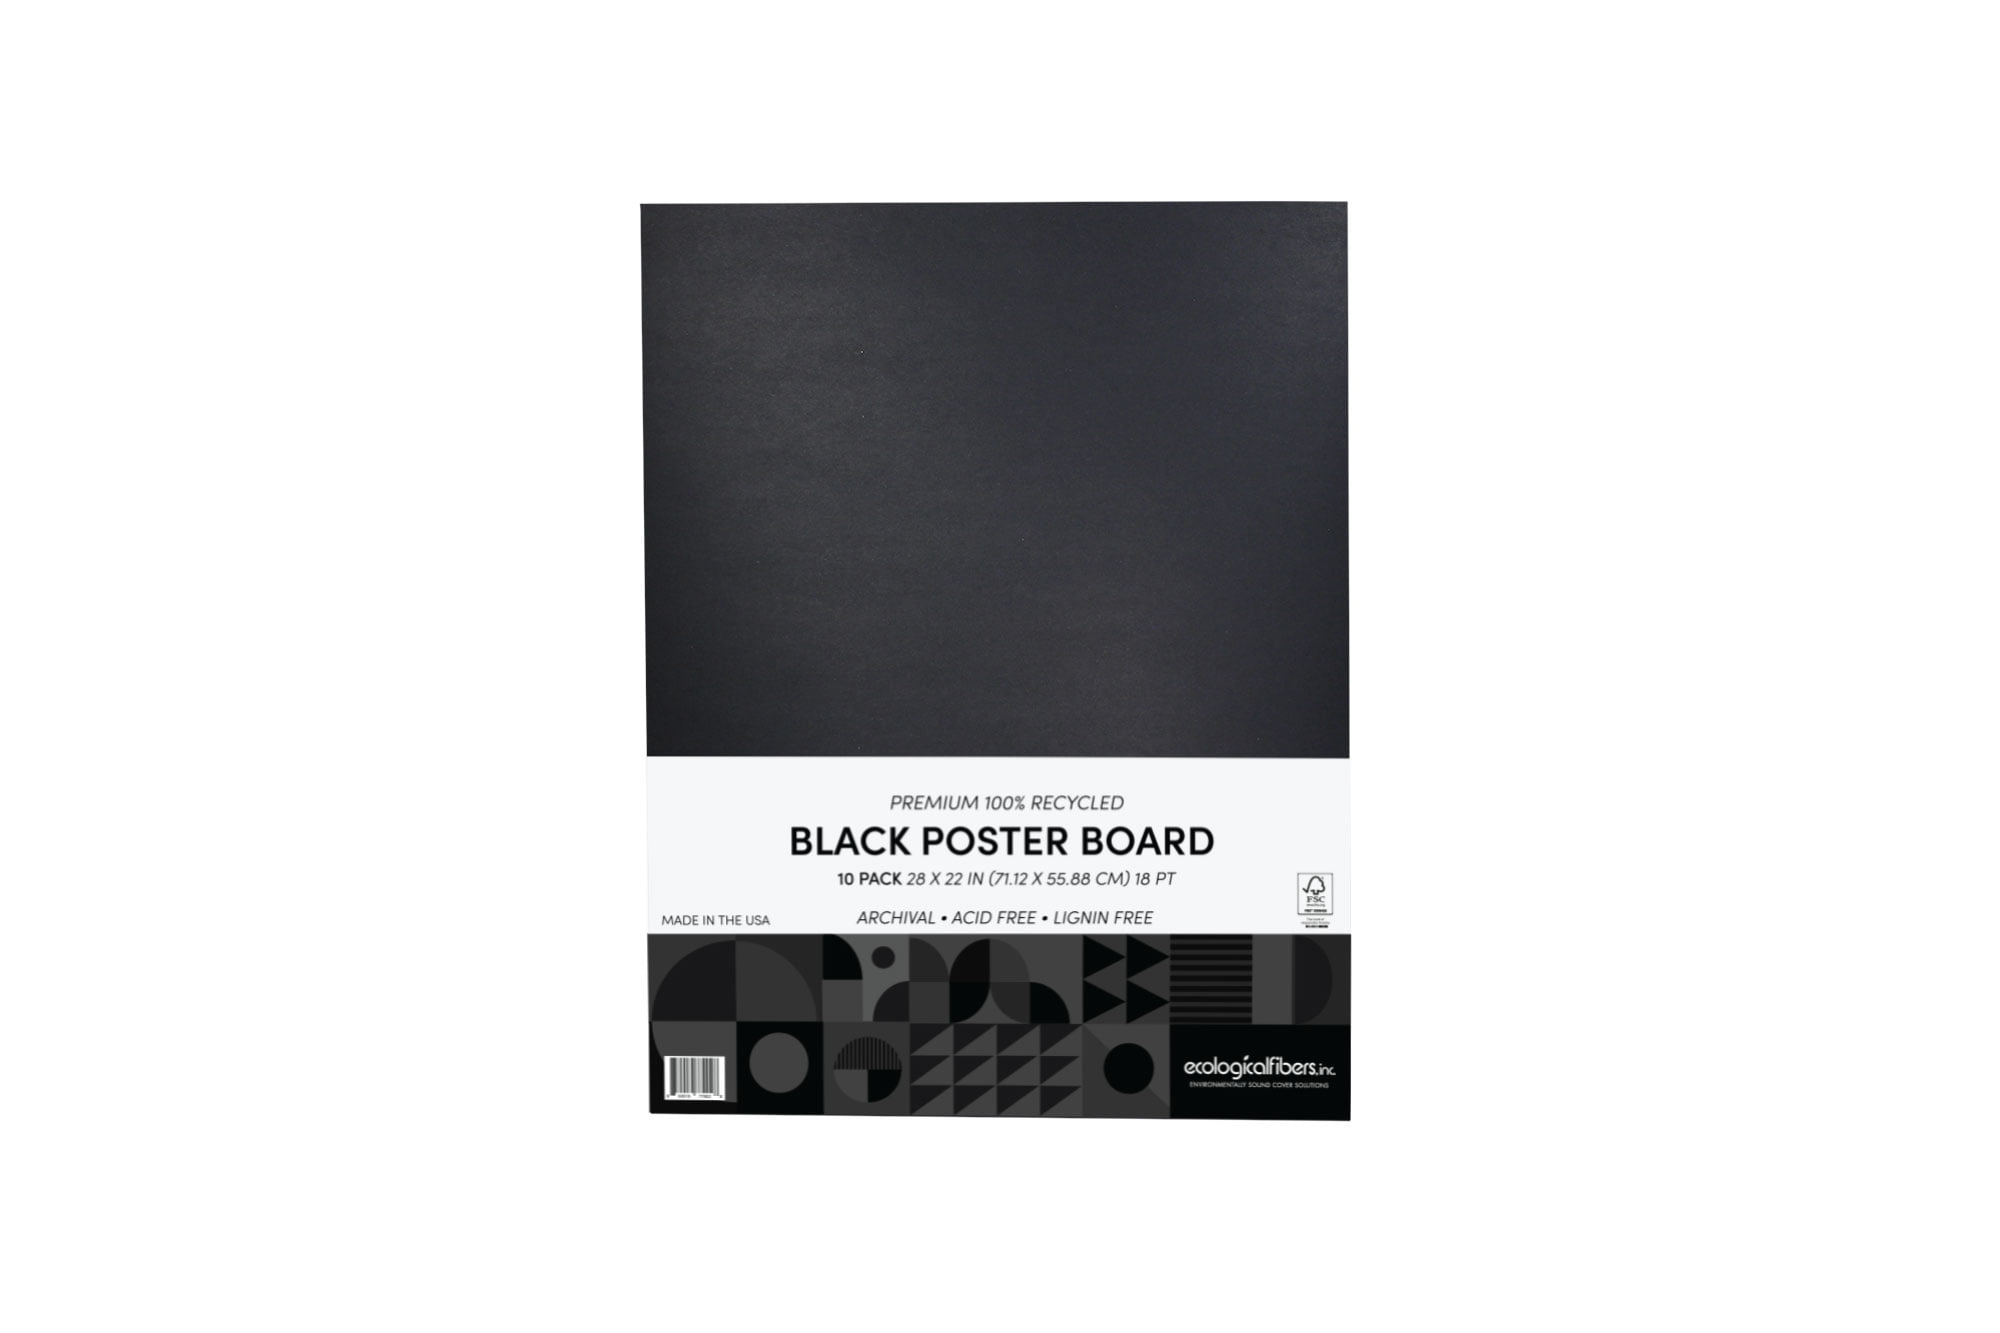 Pack of 10 Ecological Fibers Premium 100% Recycled Poster Board Black 22” x 28”